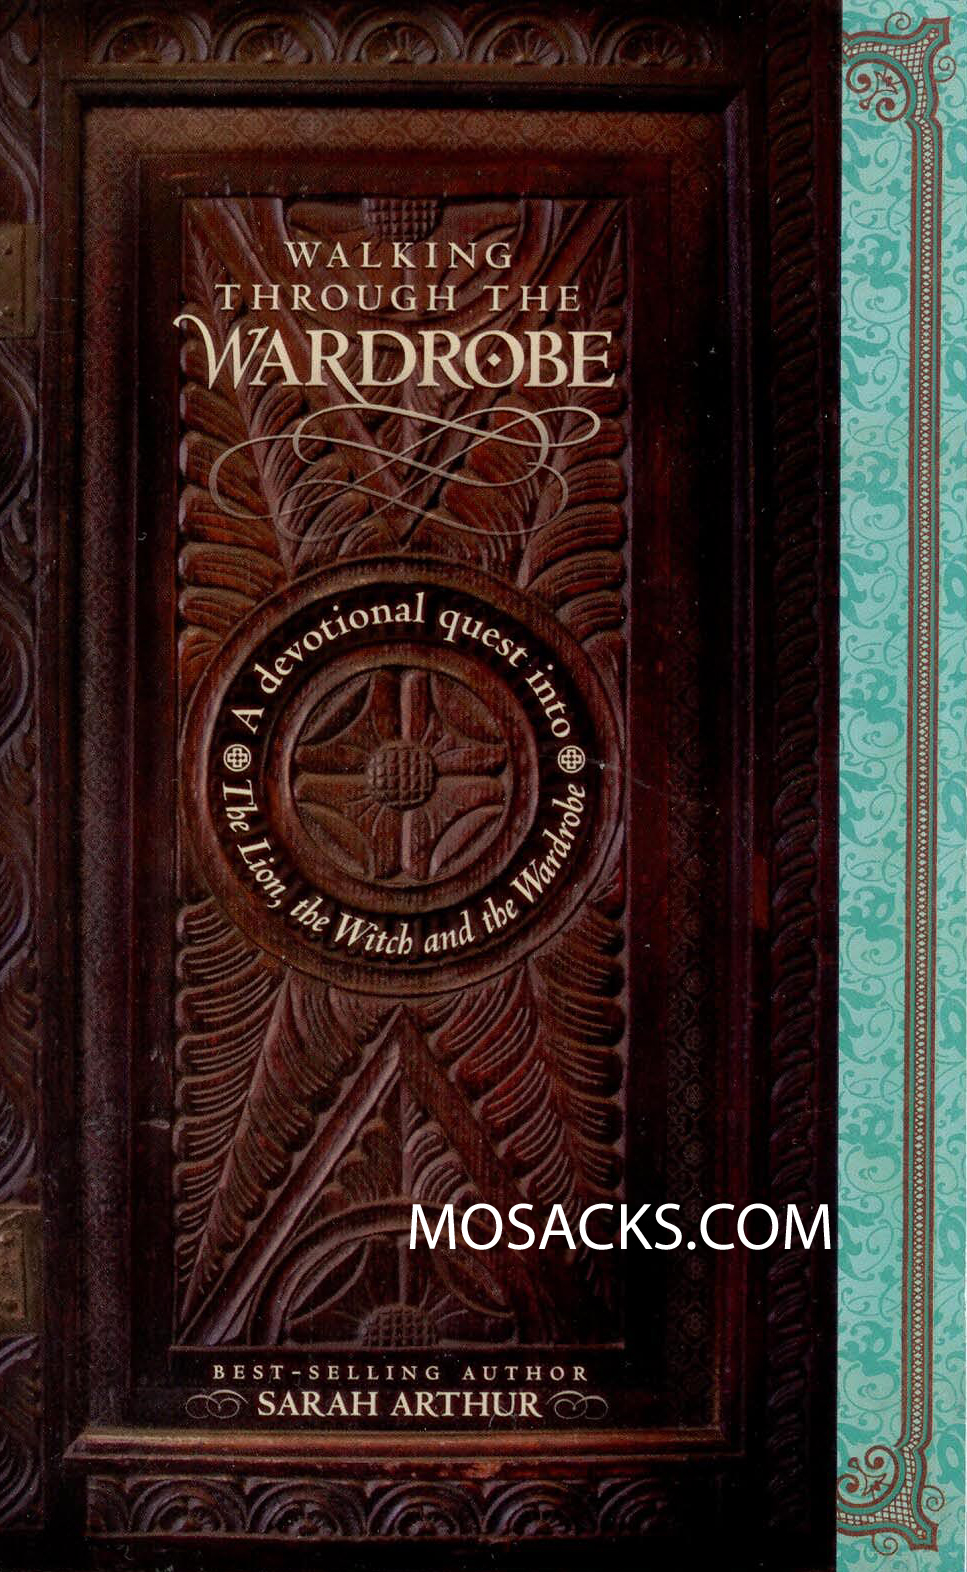 Chronicles Narnia Walking Through The Wardrobe Devotional by Sarah Arthur_out_of_print